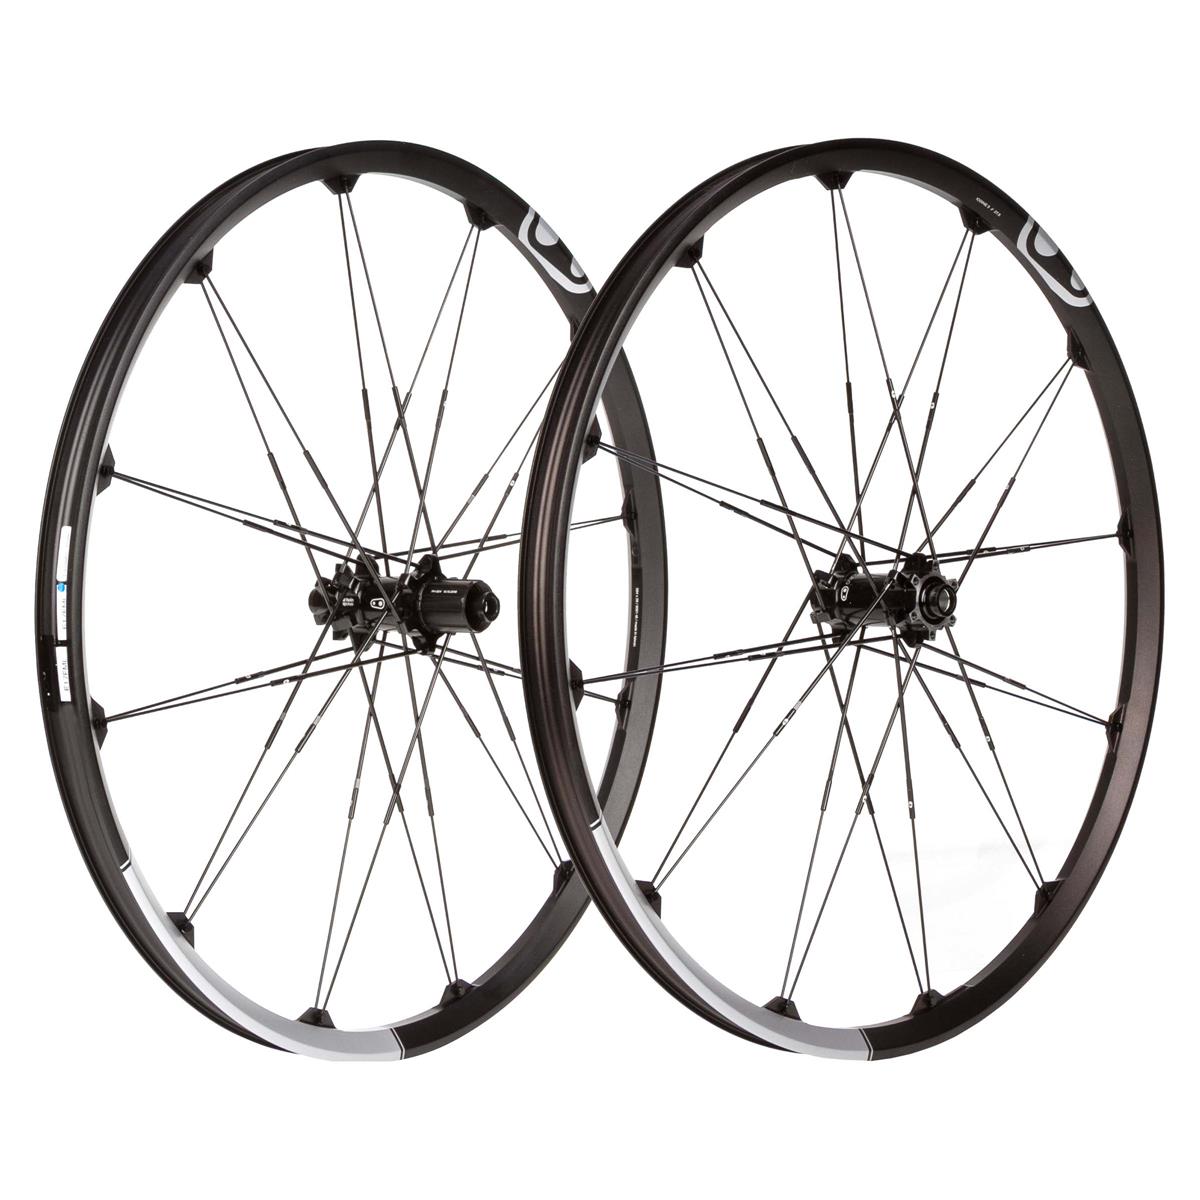 Crankbrothers Wheel Set Iodine 3 Black/Silver, 27.5 Inches, 15x110 mm/12x148 mm, BOOST, Tubeless Ready